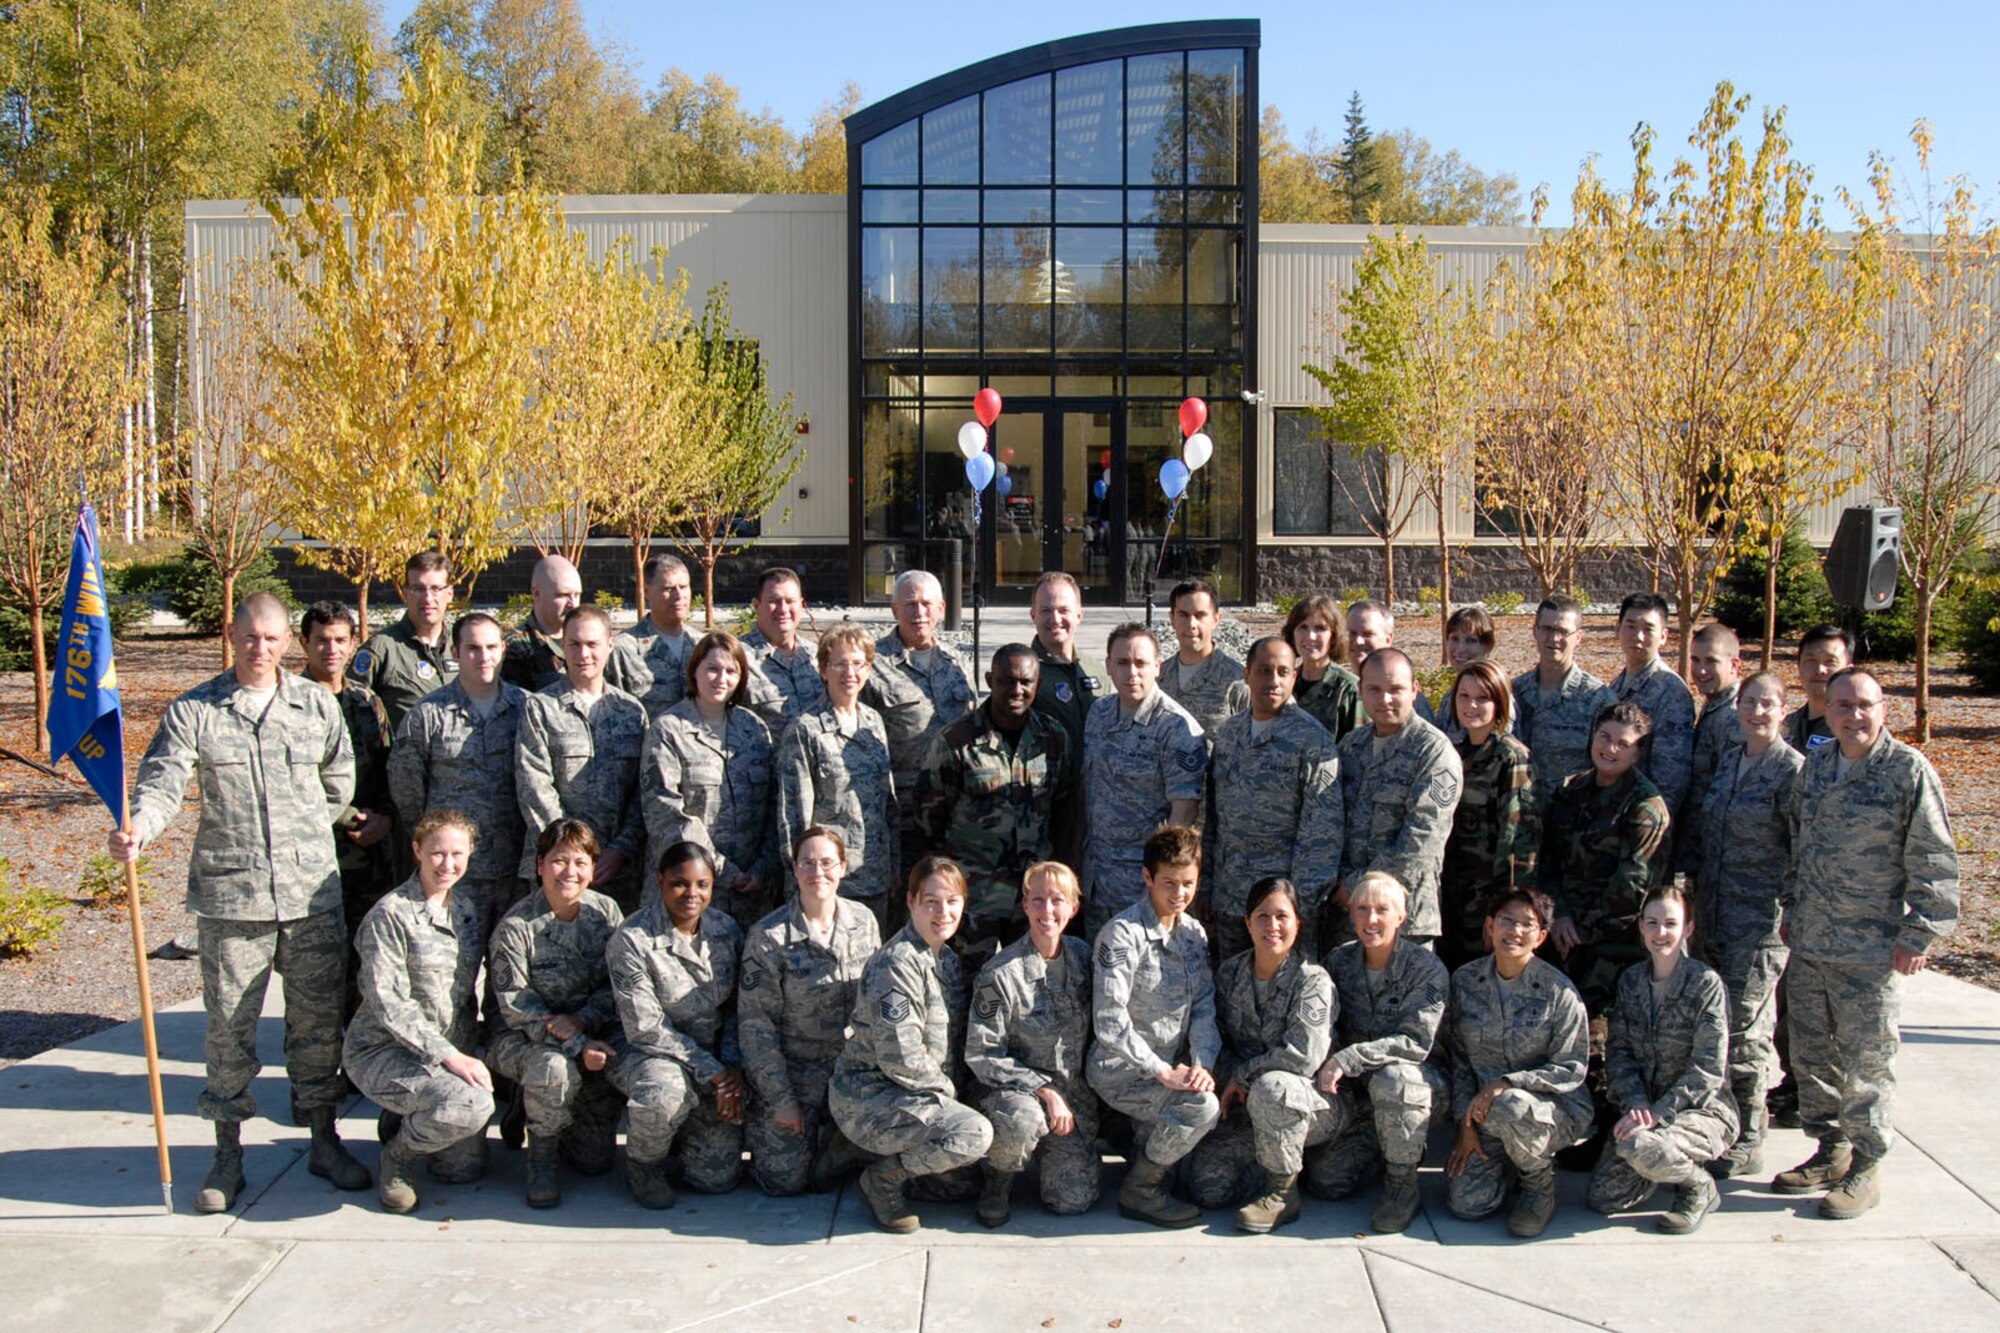 JOINT BASE ELMENDORF RICHARDSON, Alaska -- Members of the 176th Medical Group, Alaska Air National Guard, pose during the ribbon-cutting ceremony for their new Medical Readiness and Training Center here Sept. 19, 2010.  The Medical Group was one the first units from the 176th Wing to relocate here from Kulis Air National Guard Base. All wing units will eventually relocate here as part of the Federal 2005 Base Realignment and Closure (BRAC) legislation; most of the remaining units will make the move in early 2011. Alaska Air National Guard photo by Master Sgt. Shannon Oleson.